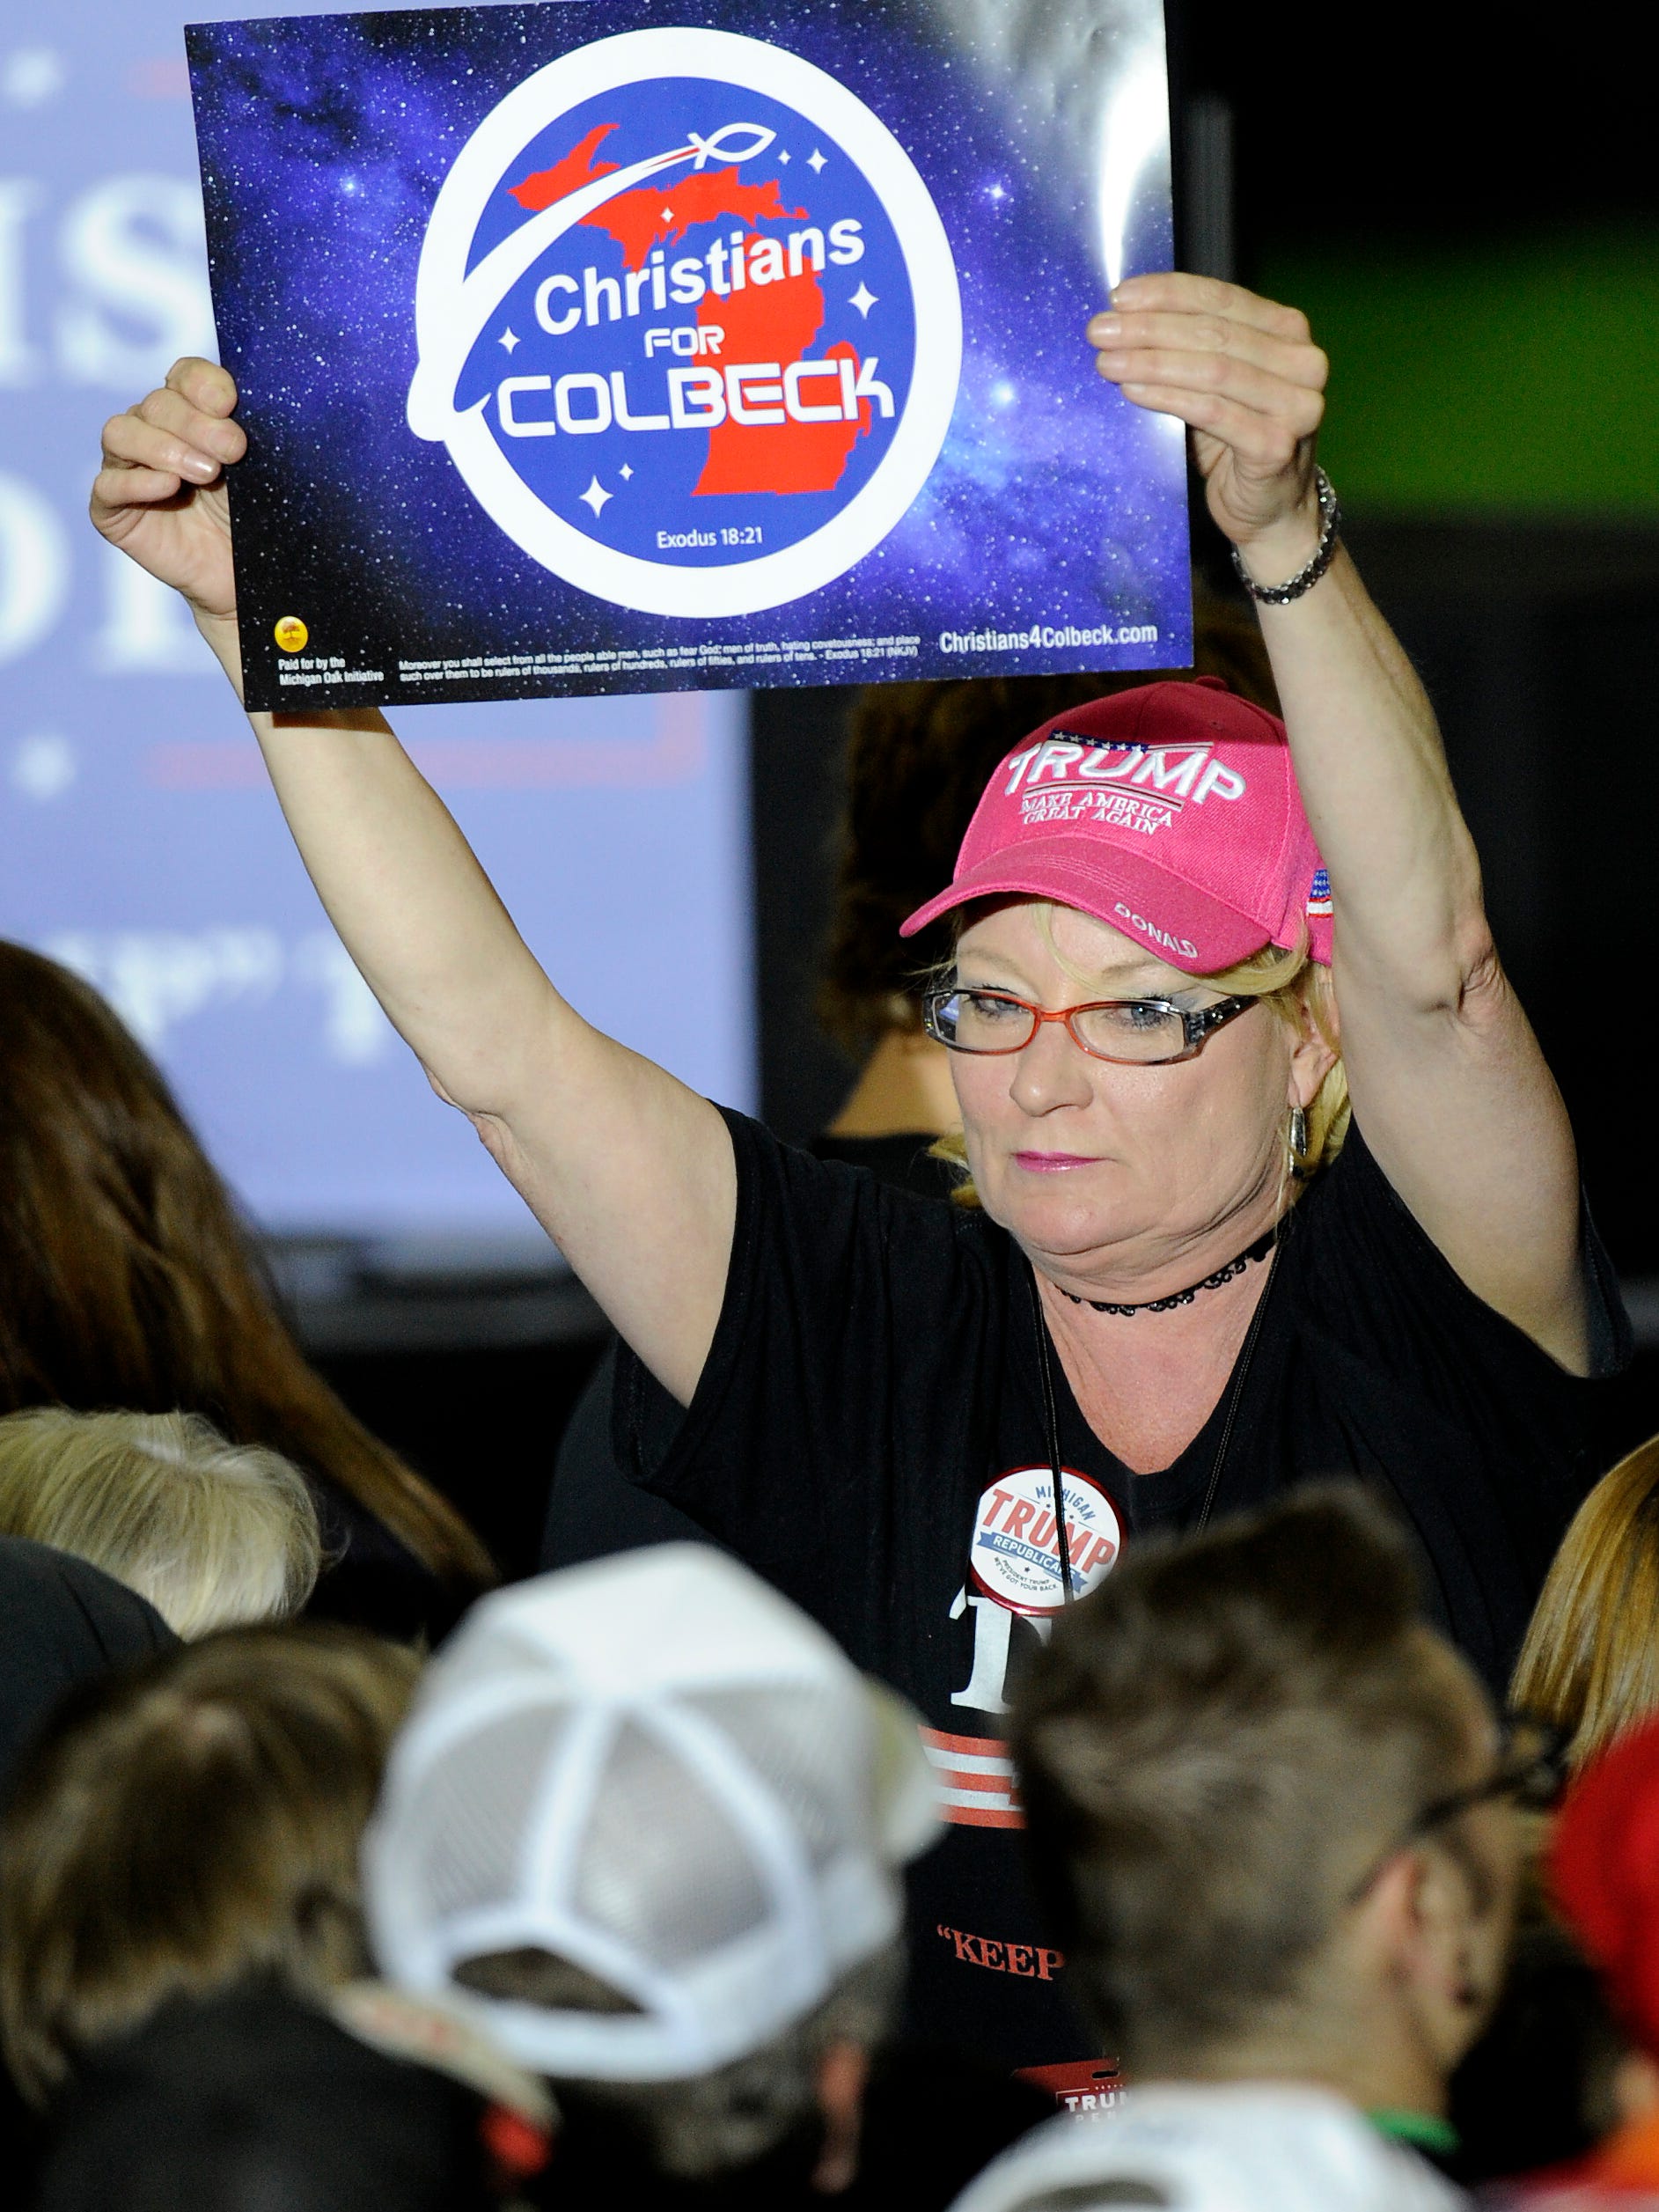 A woman holds up a Christians for Colbeck sign. Patrick Colbeck is on the Republican primary ballot for governor.